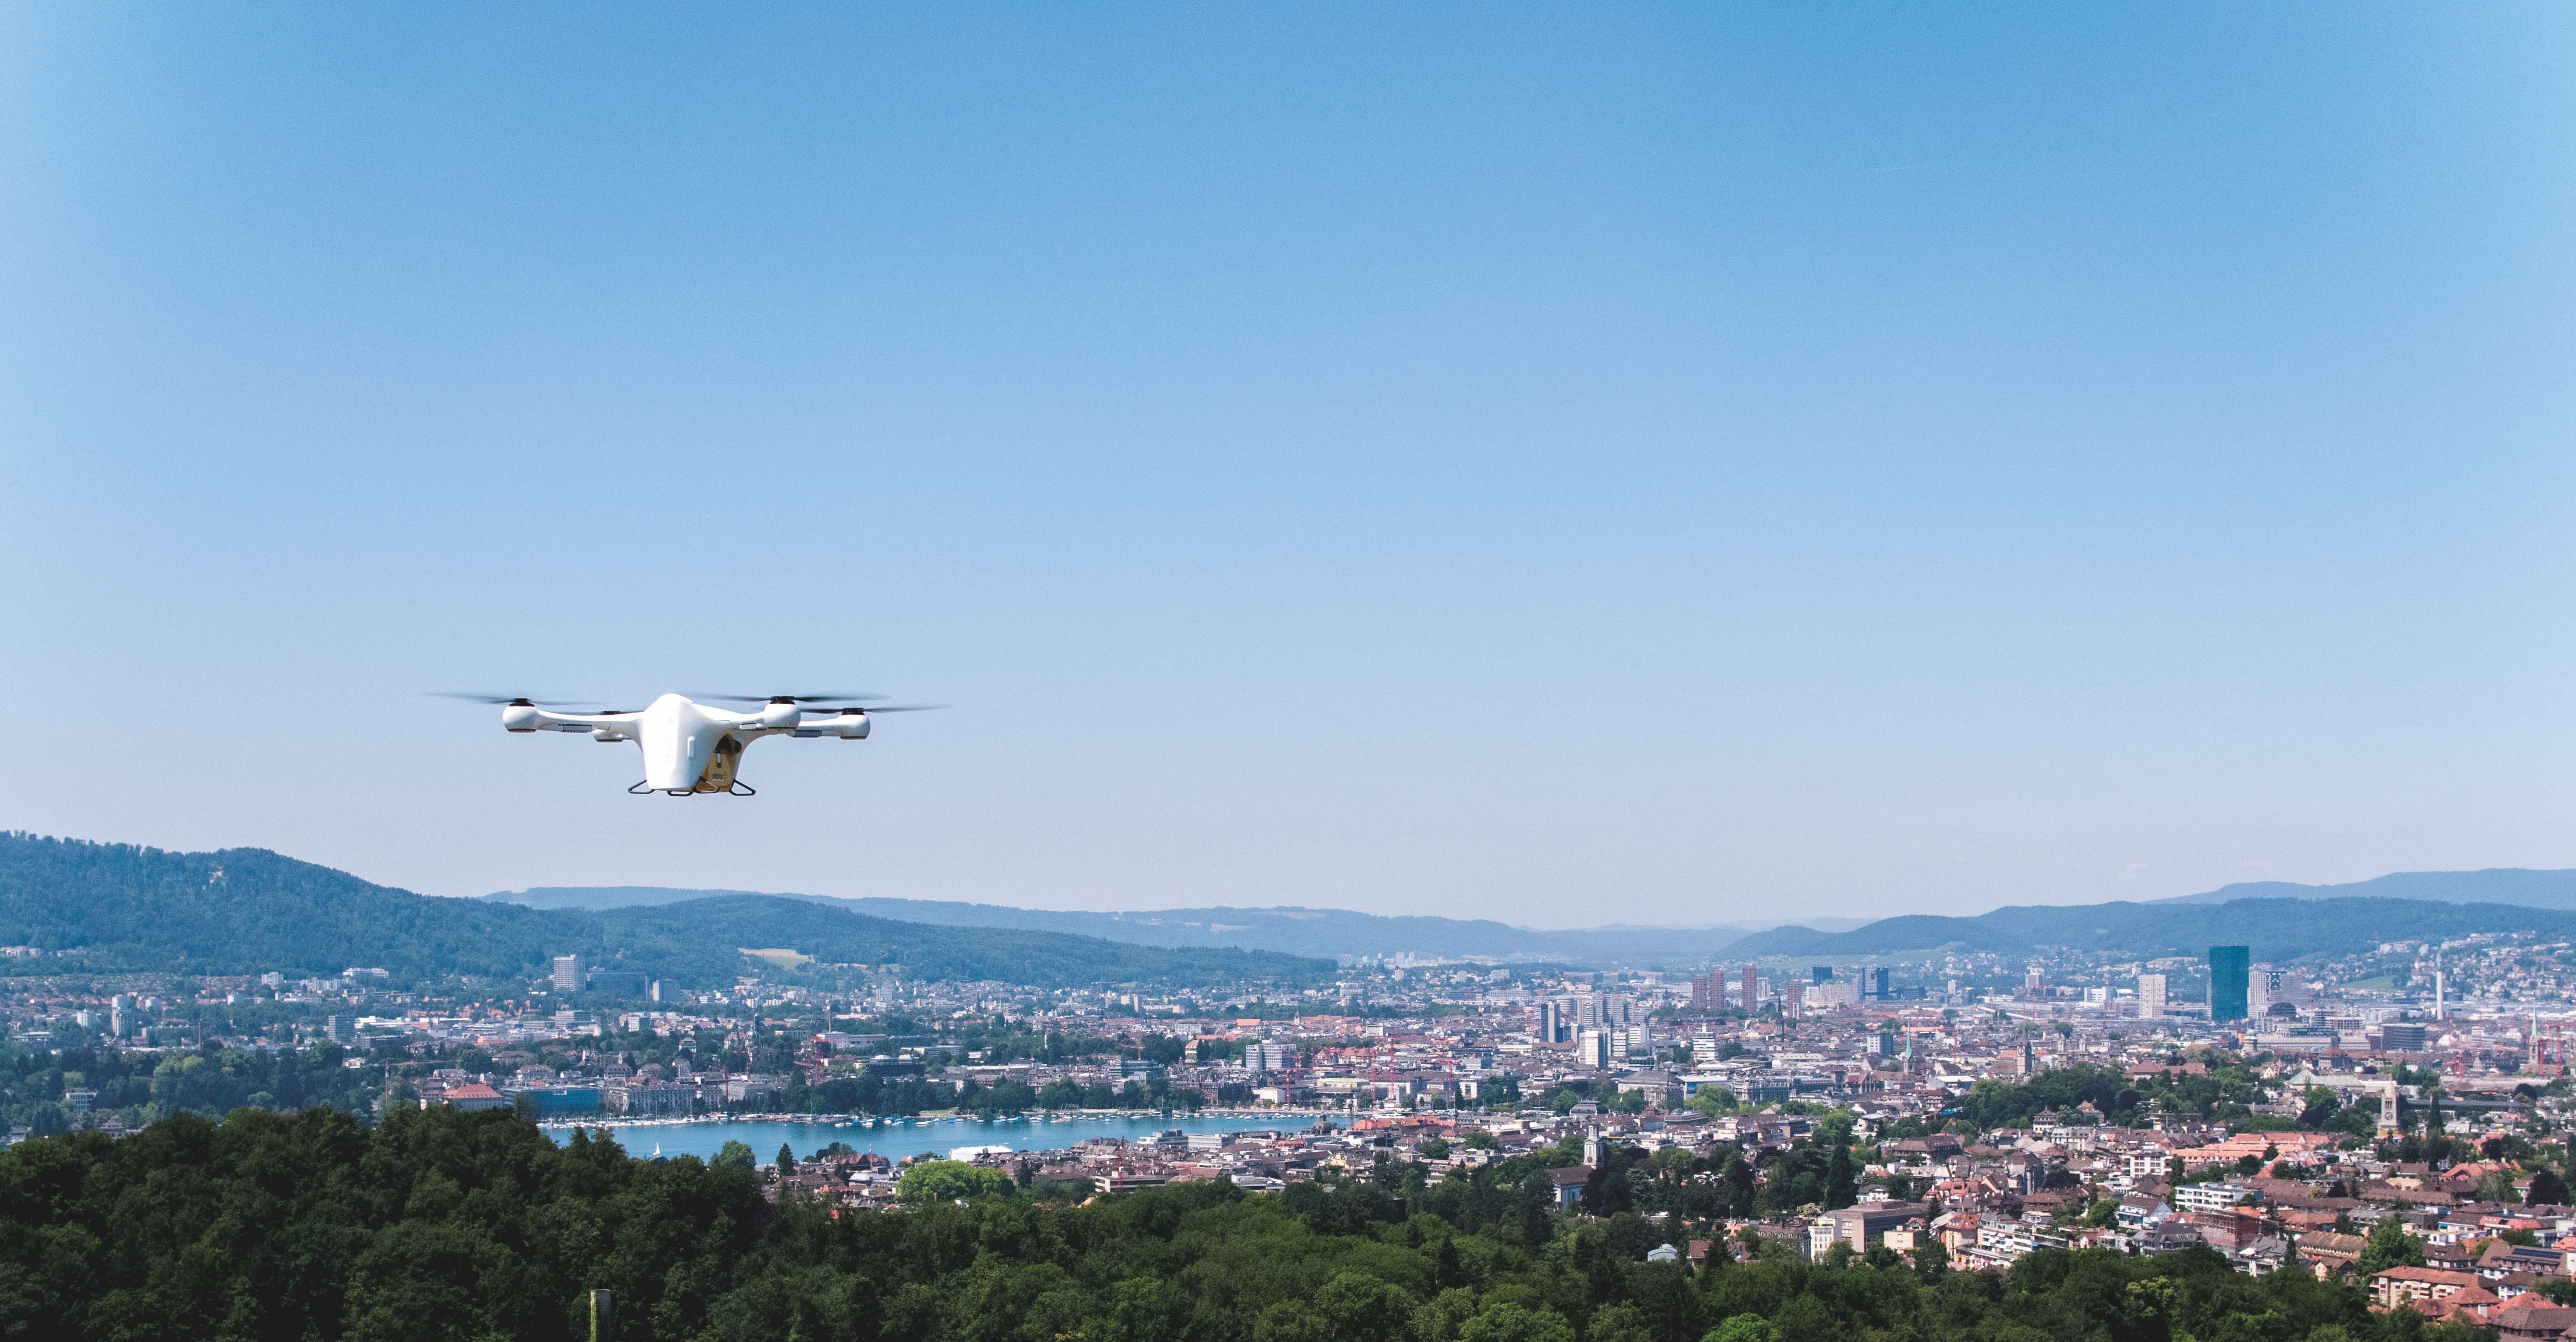 Matternet flying over the city of Zurich